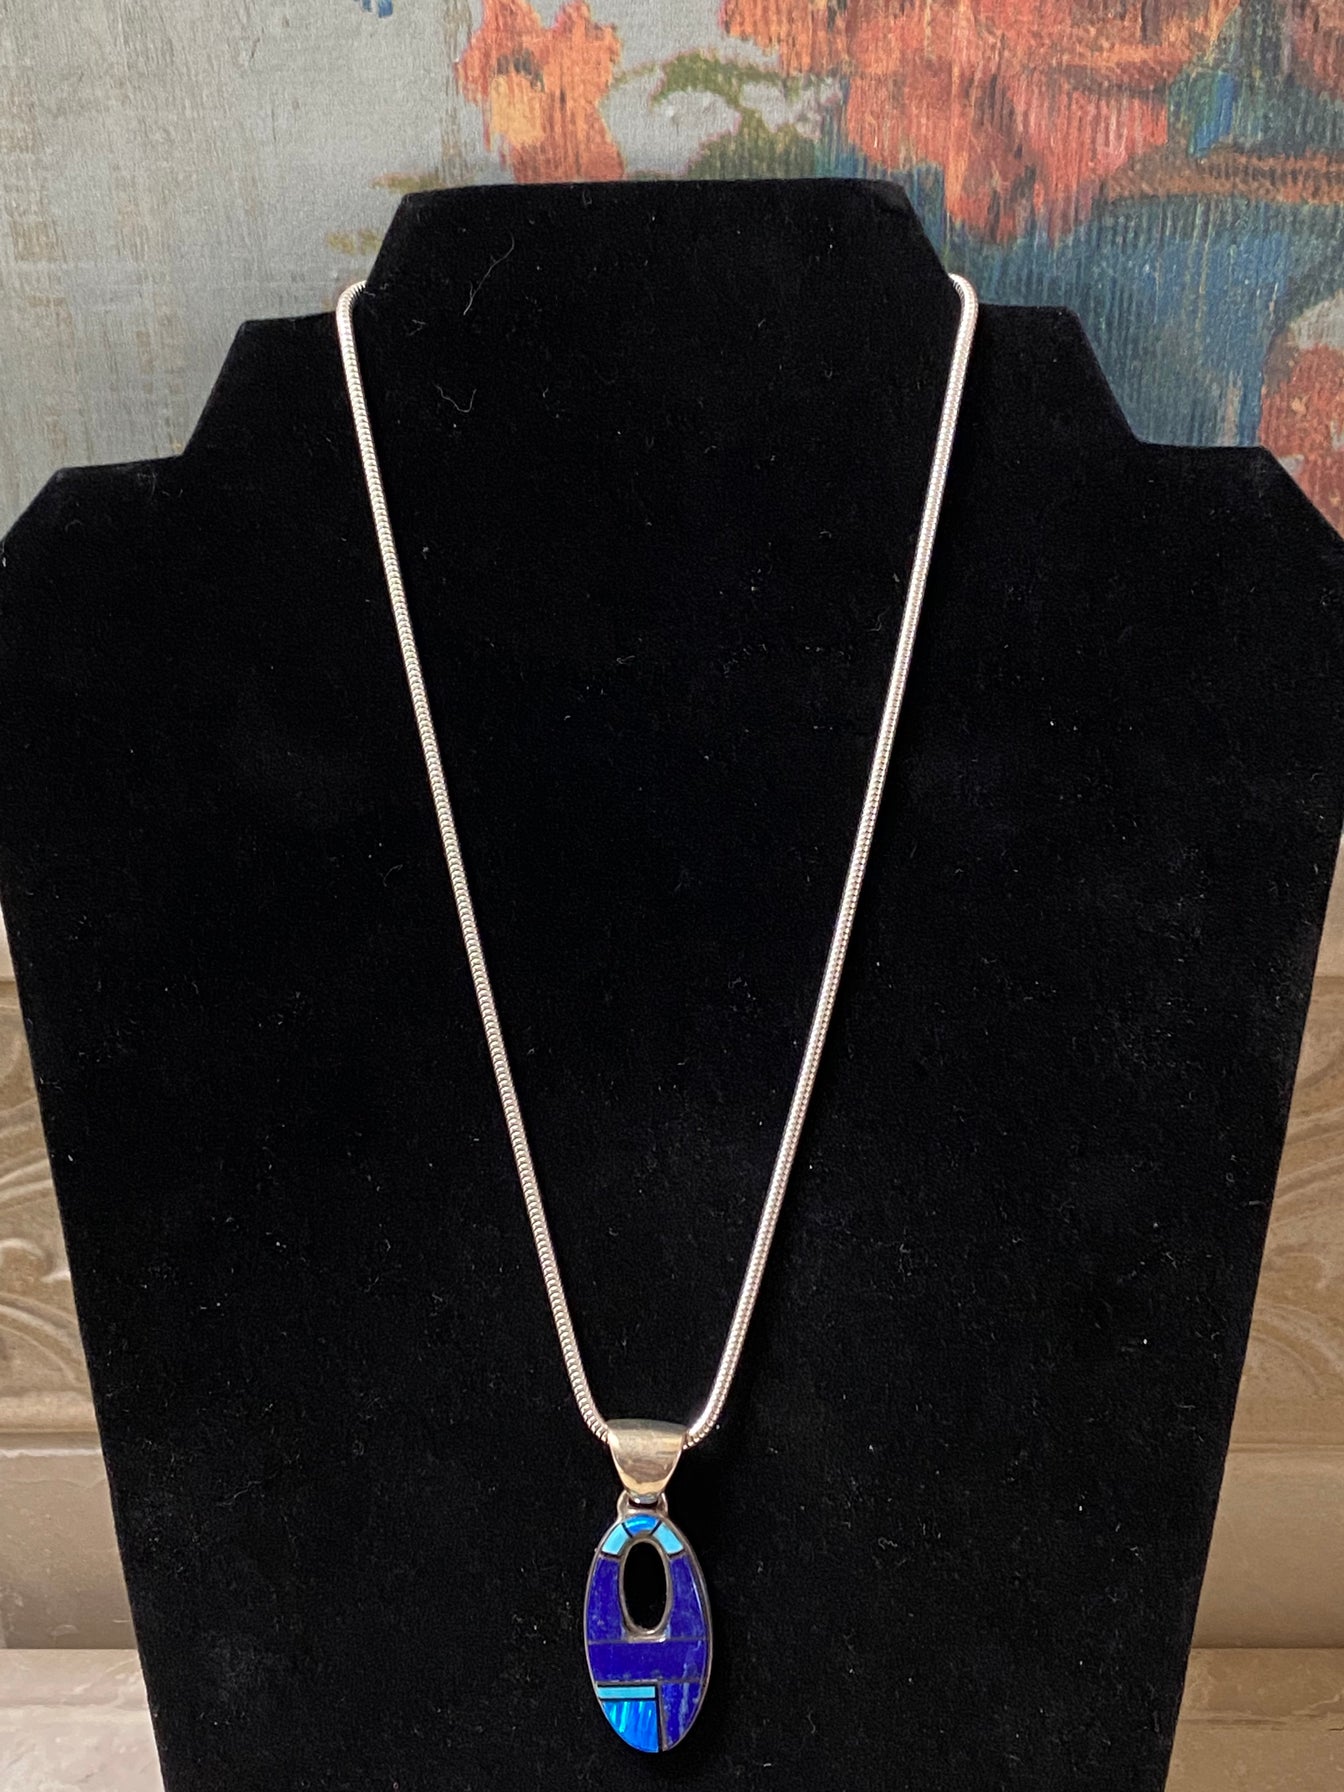 Navajo Lapis, Turquoise, Blue Opal Pendant & 18" Sterling Silver Chain